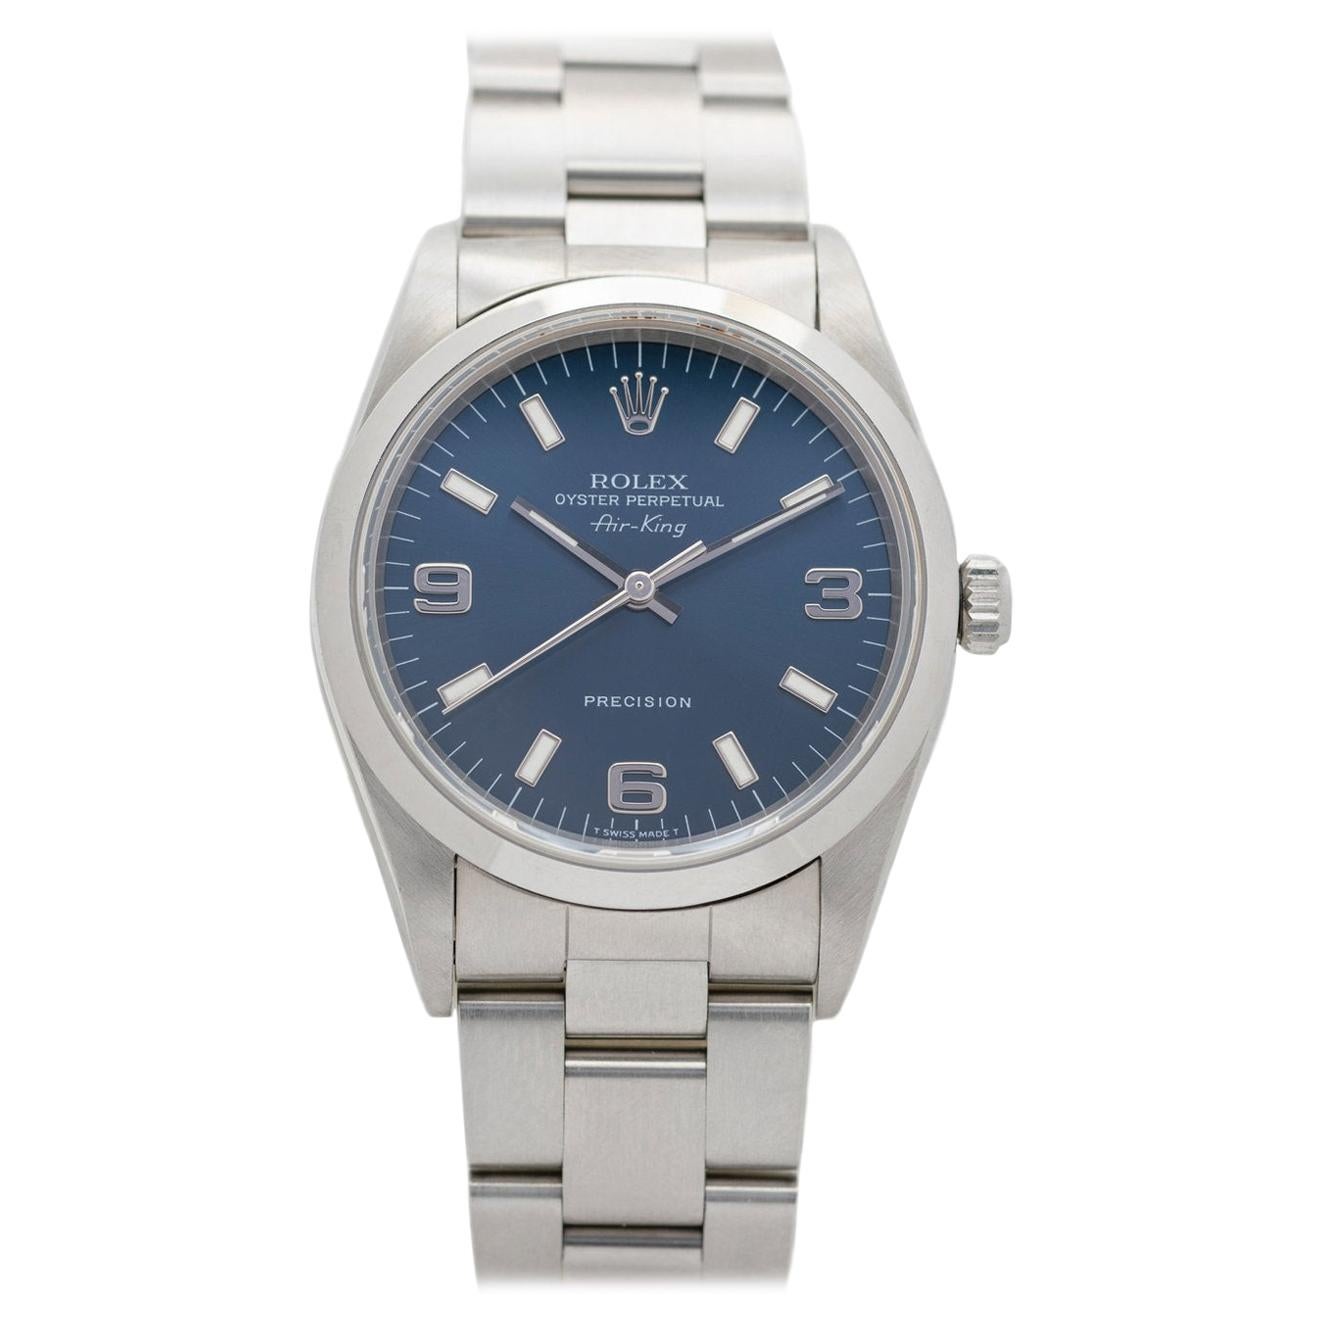 Rolex Oyster Perpetual AirKing Watch Model 14000